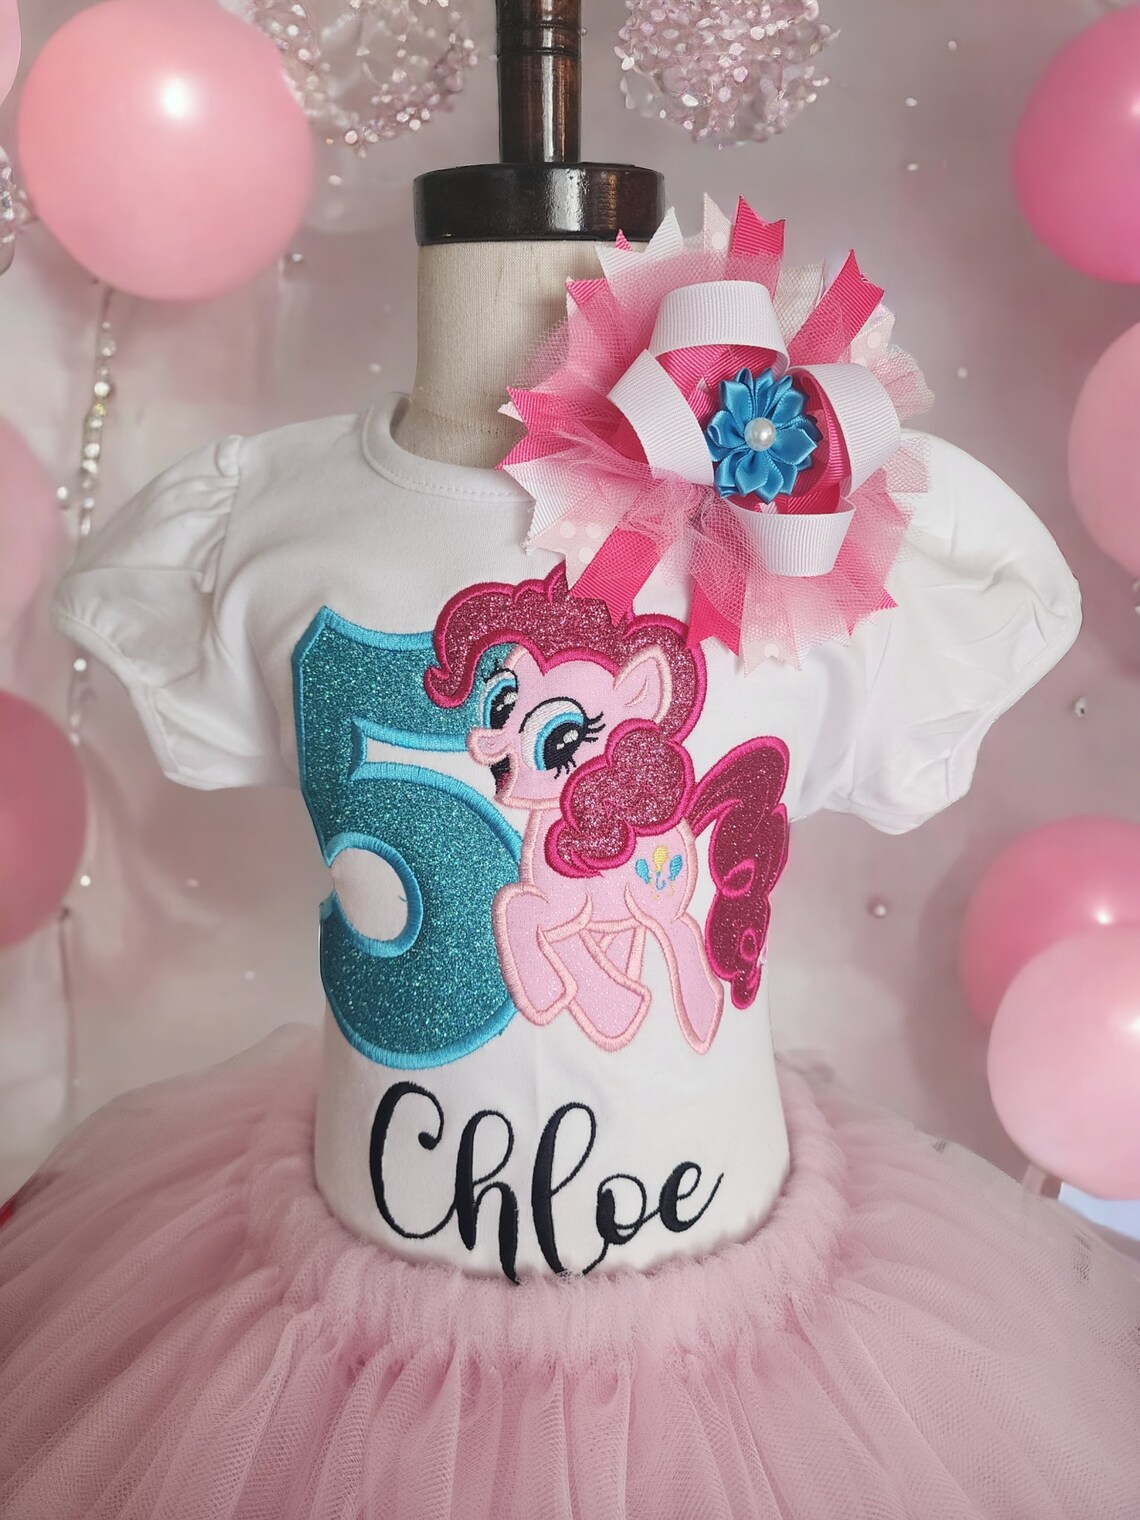 My little pony pinky pie tutu set for girls/ pink pony /personalized pinky pie birthday outfit personalized shirt, party themed